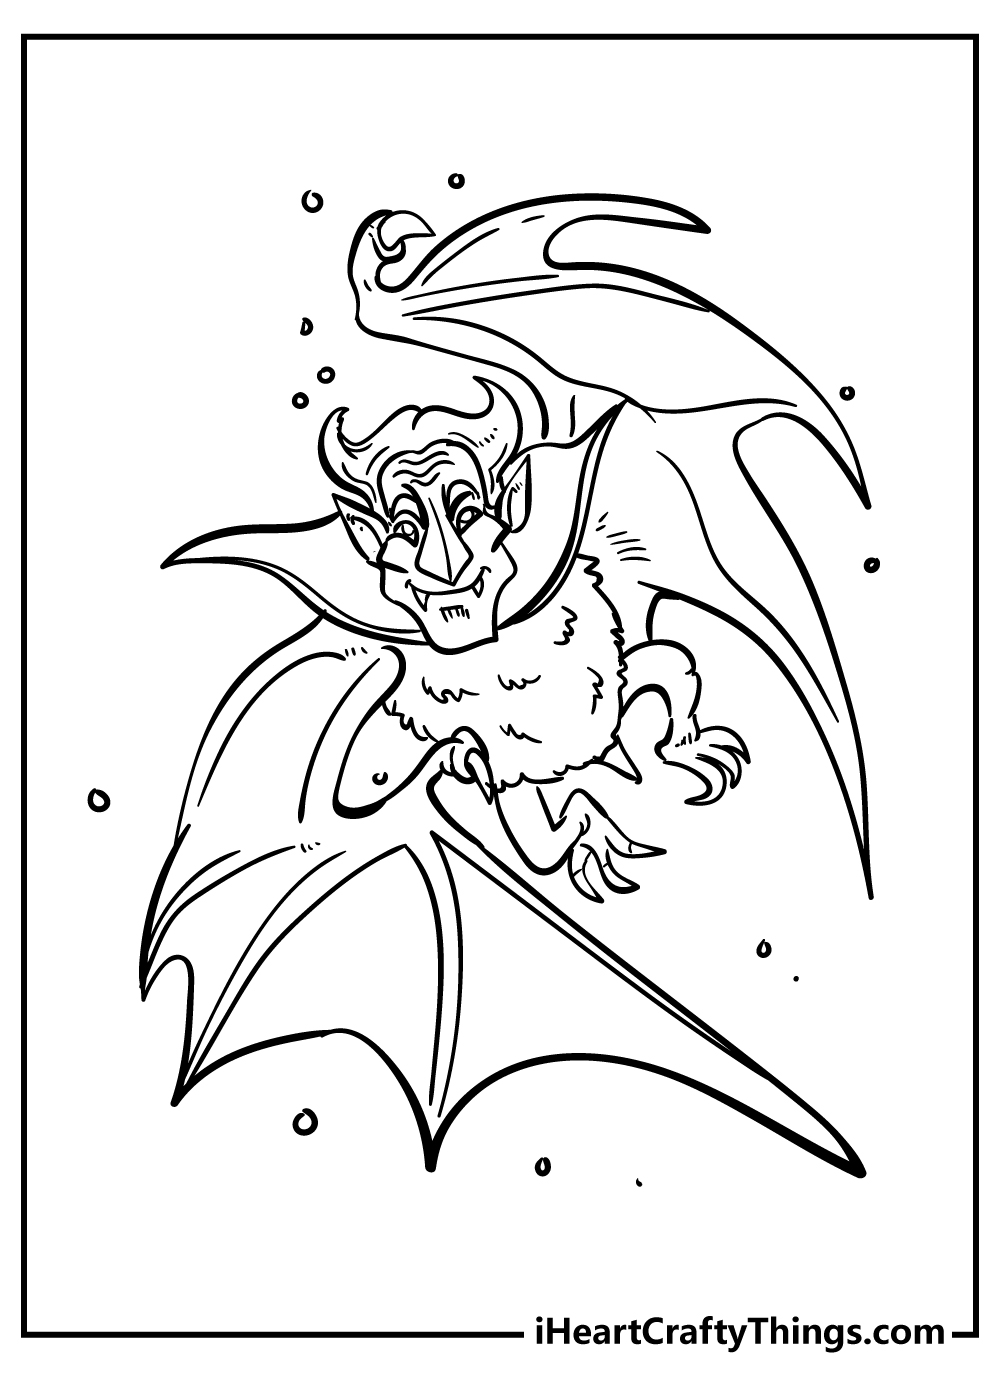 Vampire Coloring Pages for preschoolers free printable